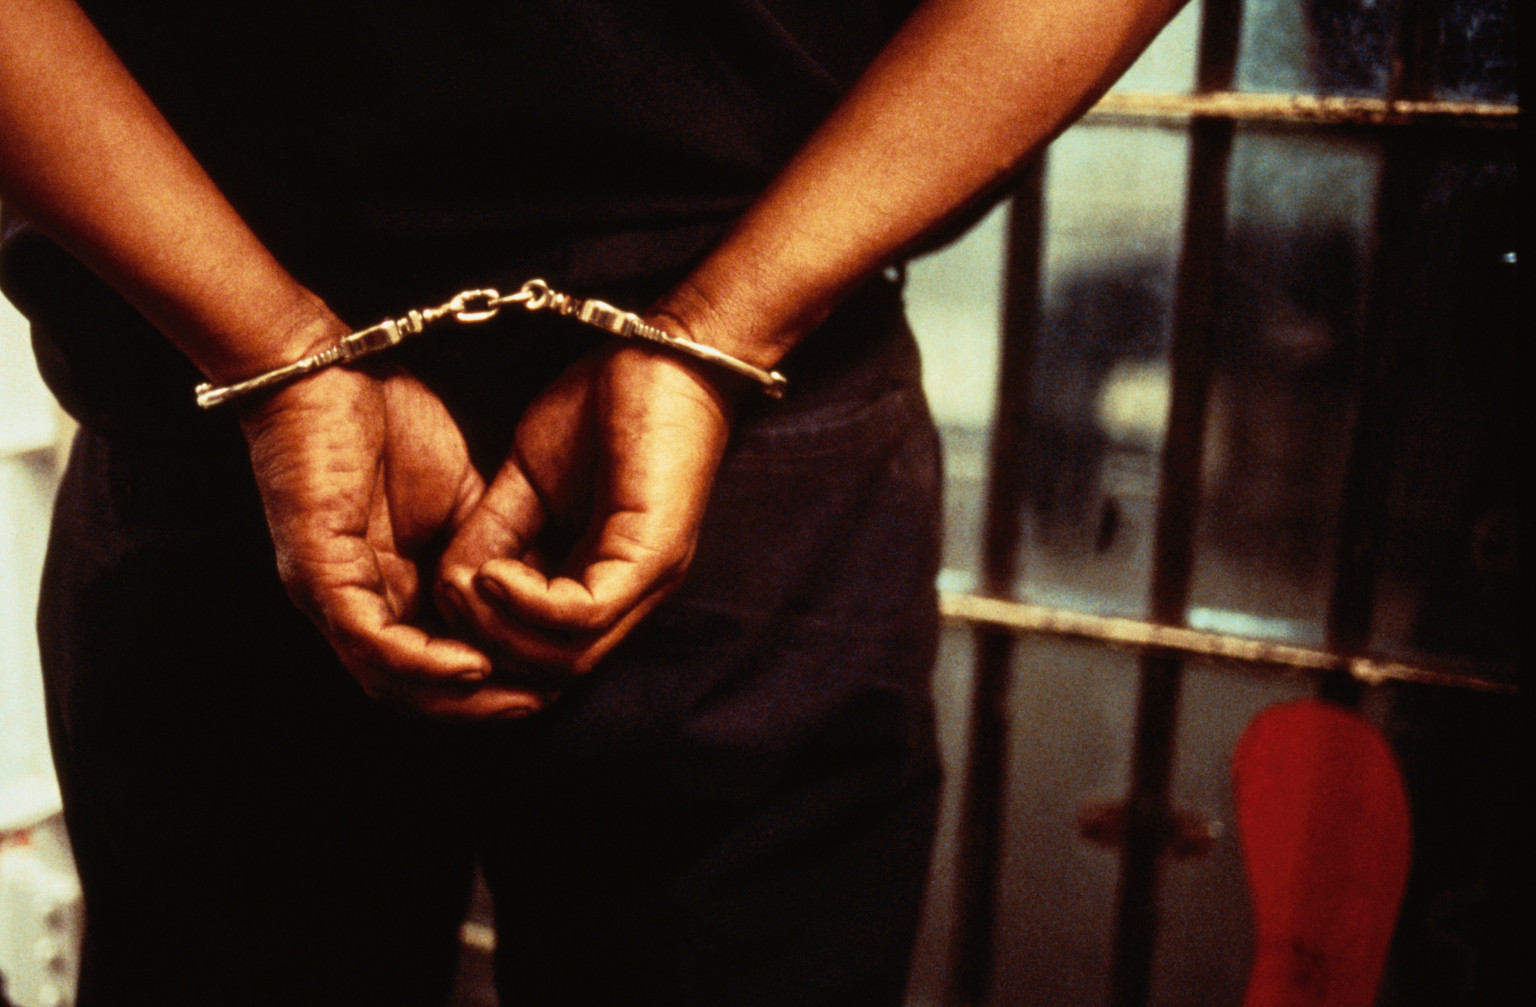 Police grab suspected ‘notorious’ robber